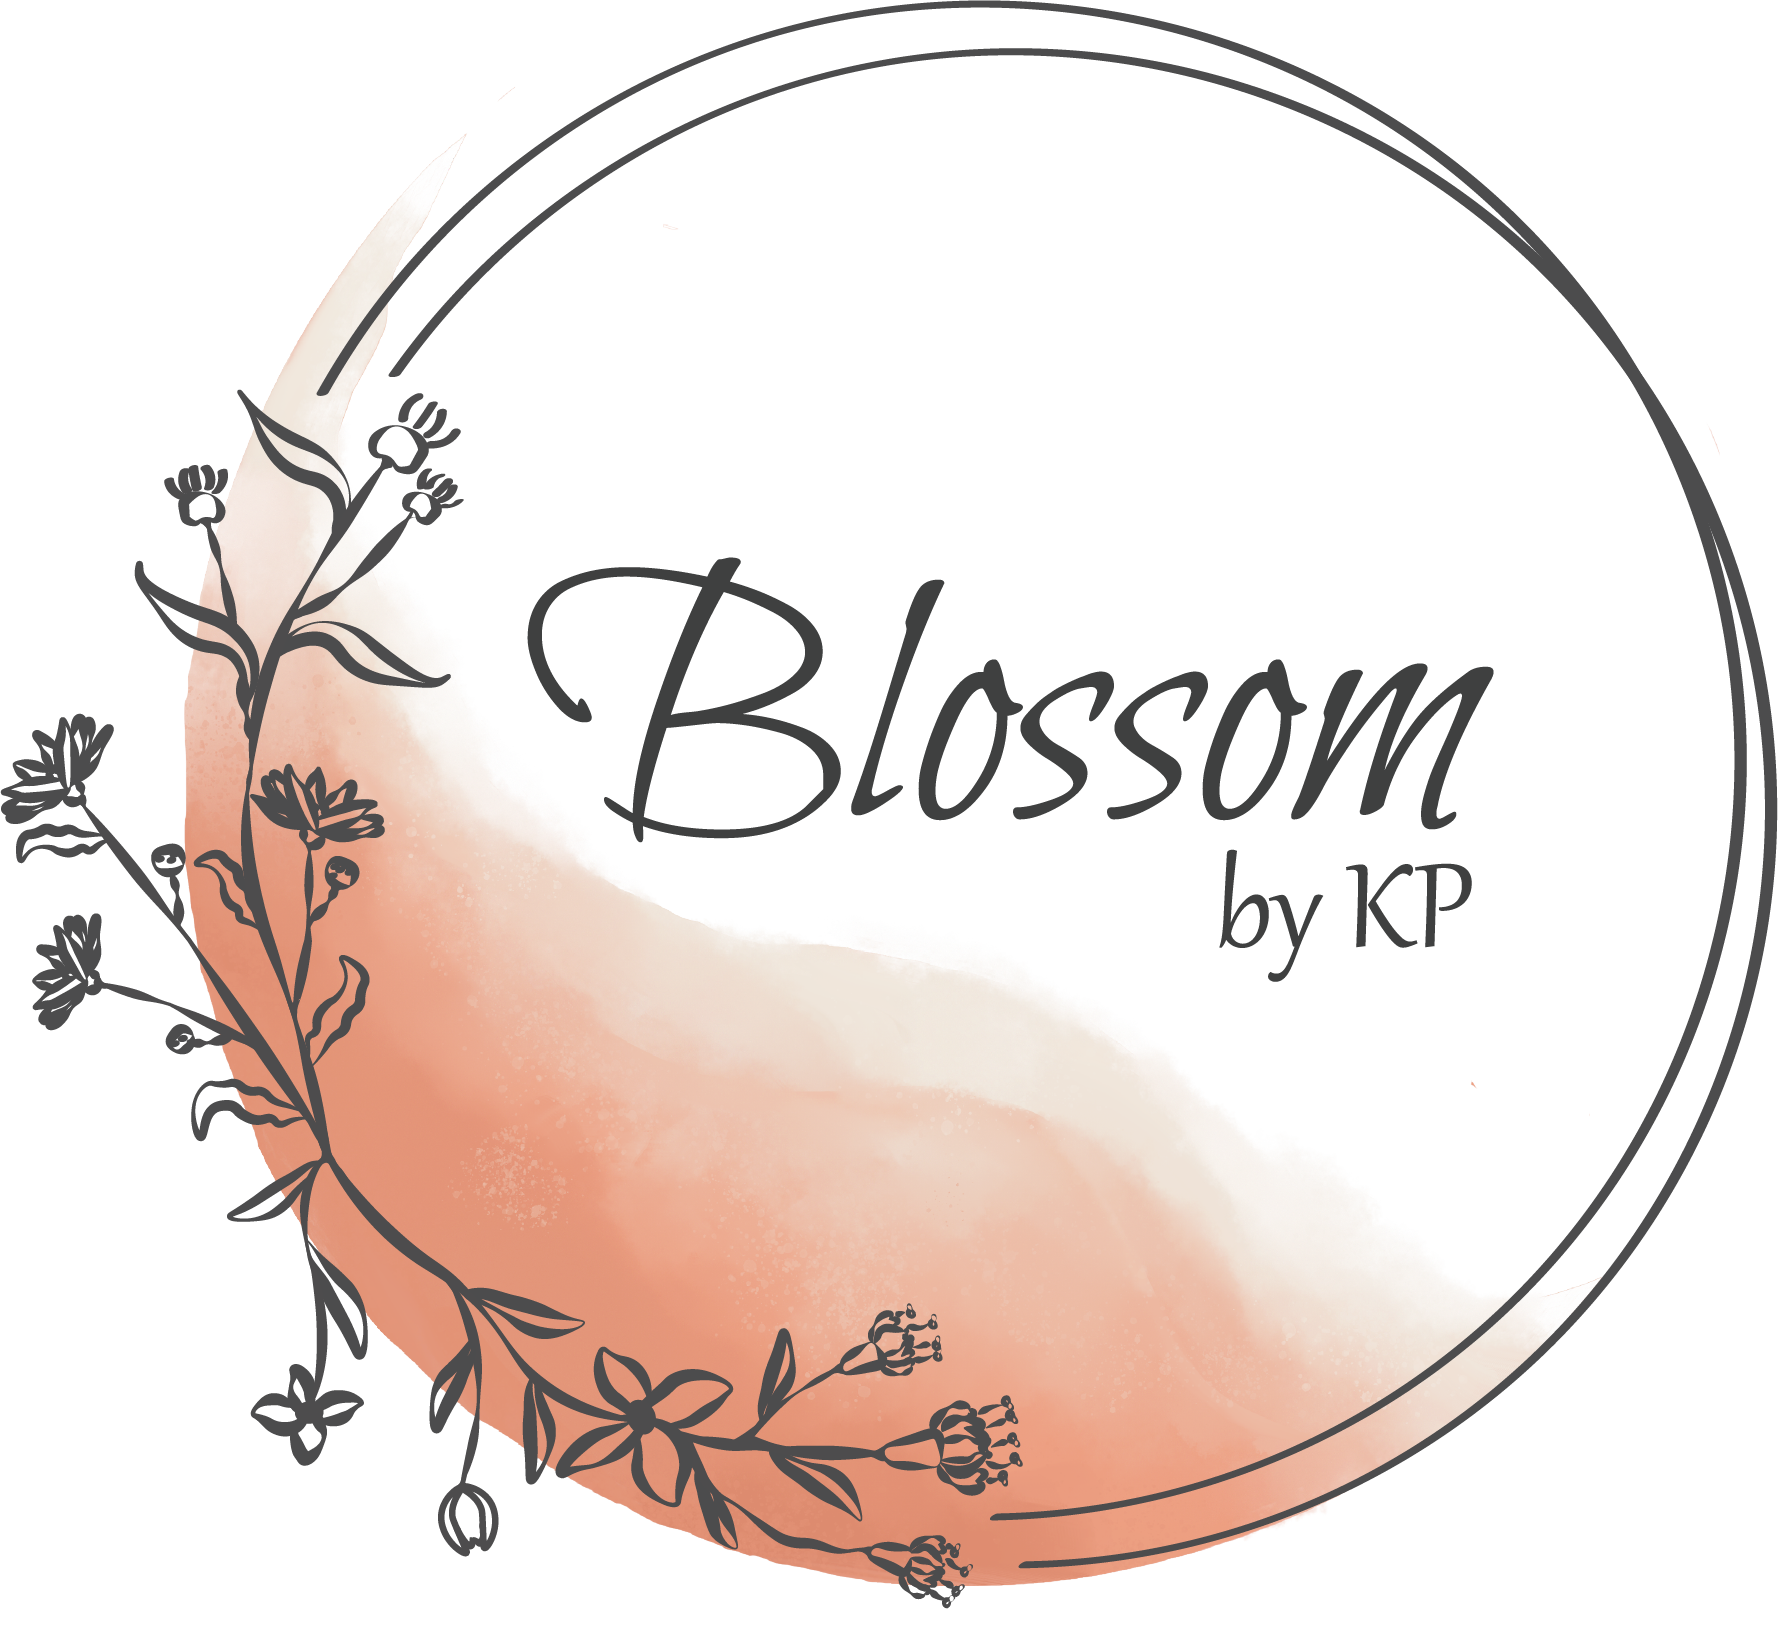 Blossom by KP